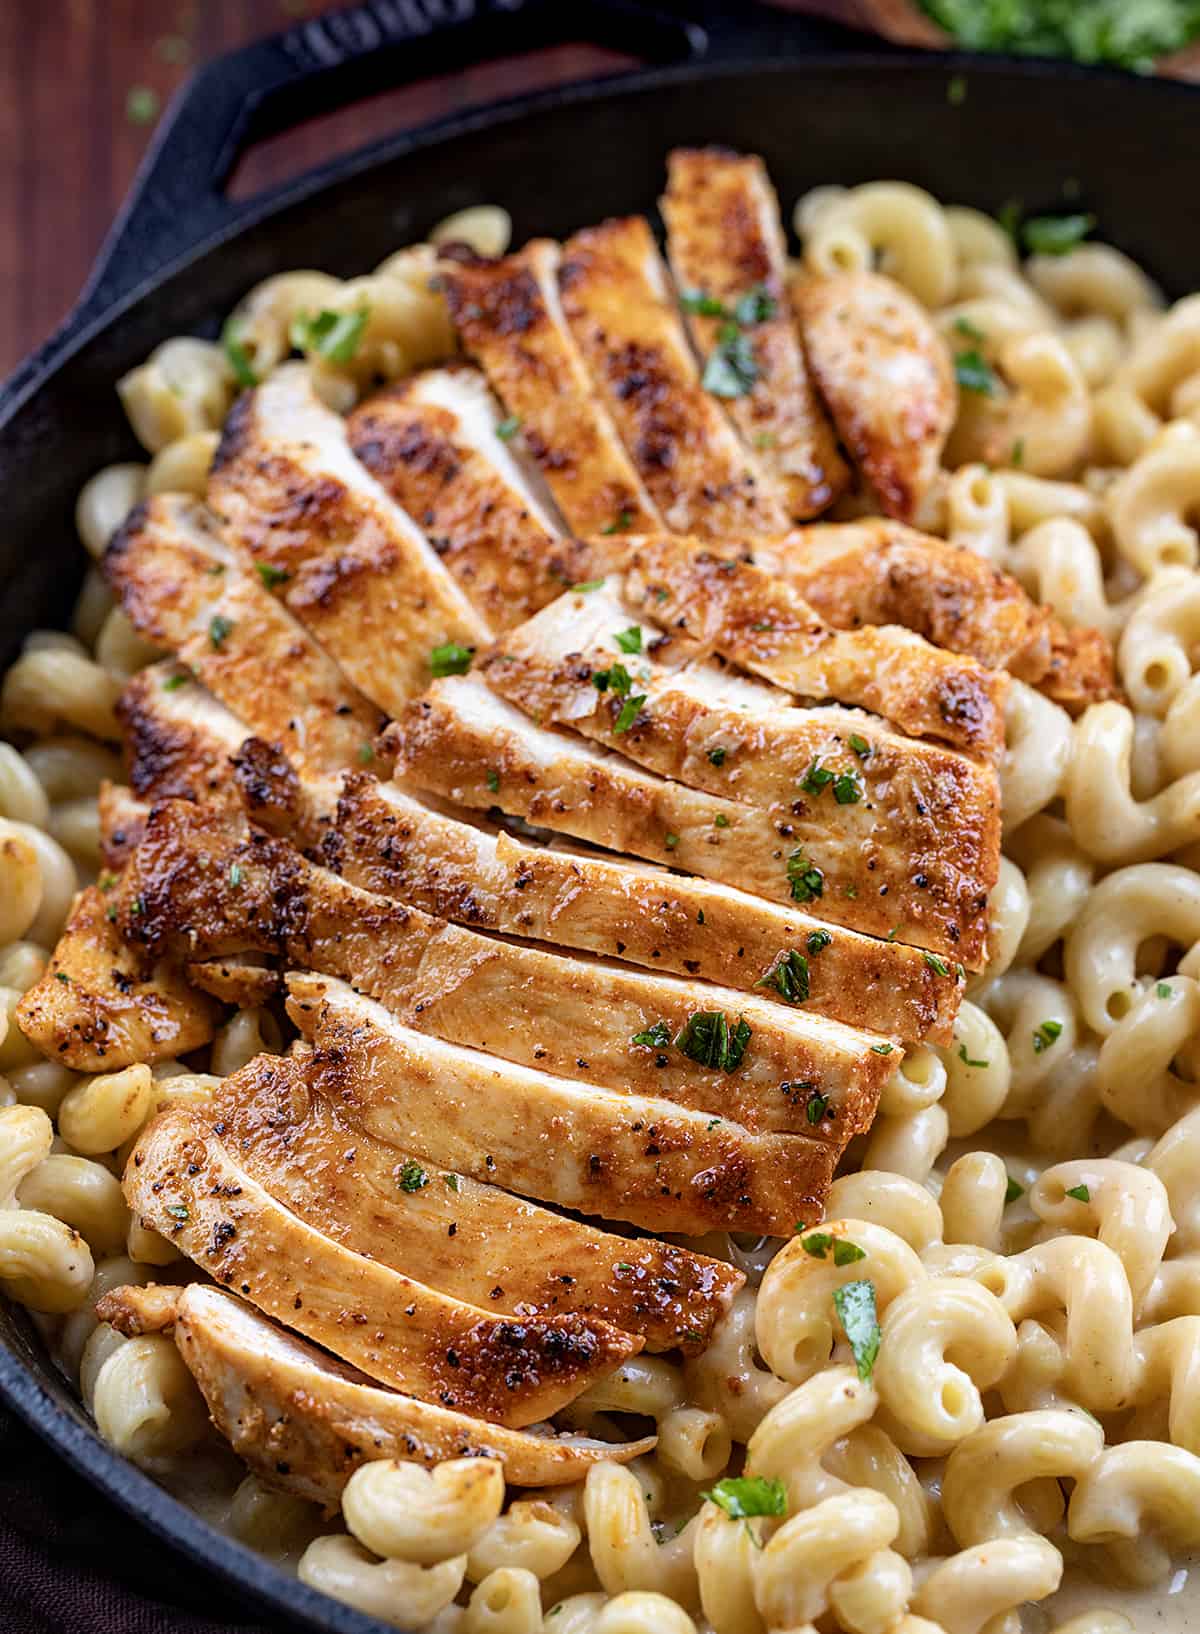 Cut into Chicken on Top of White Cheddar Chicken Pasta Noodles.